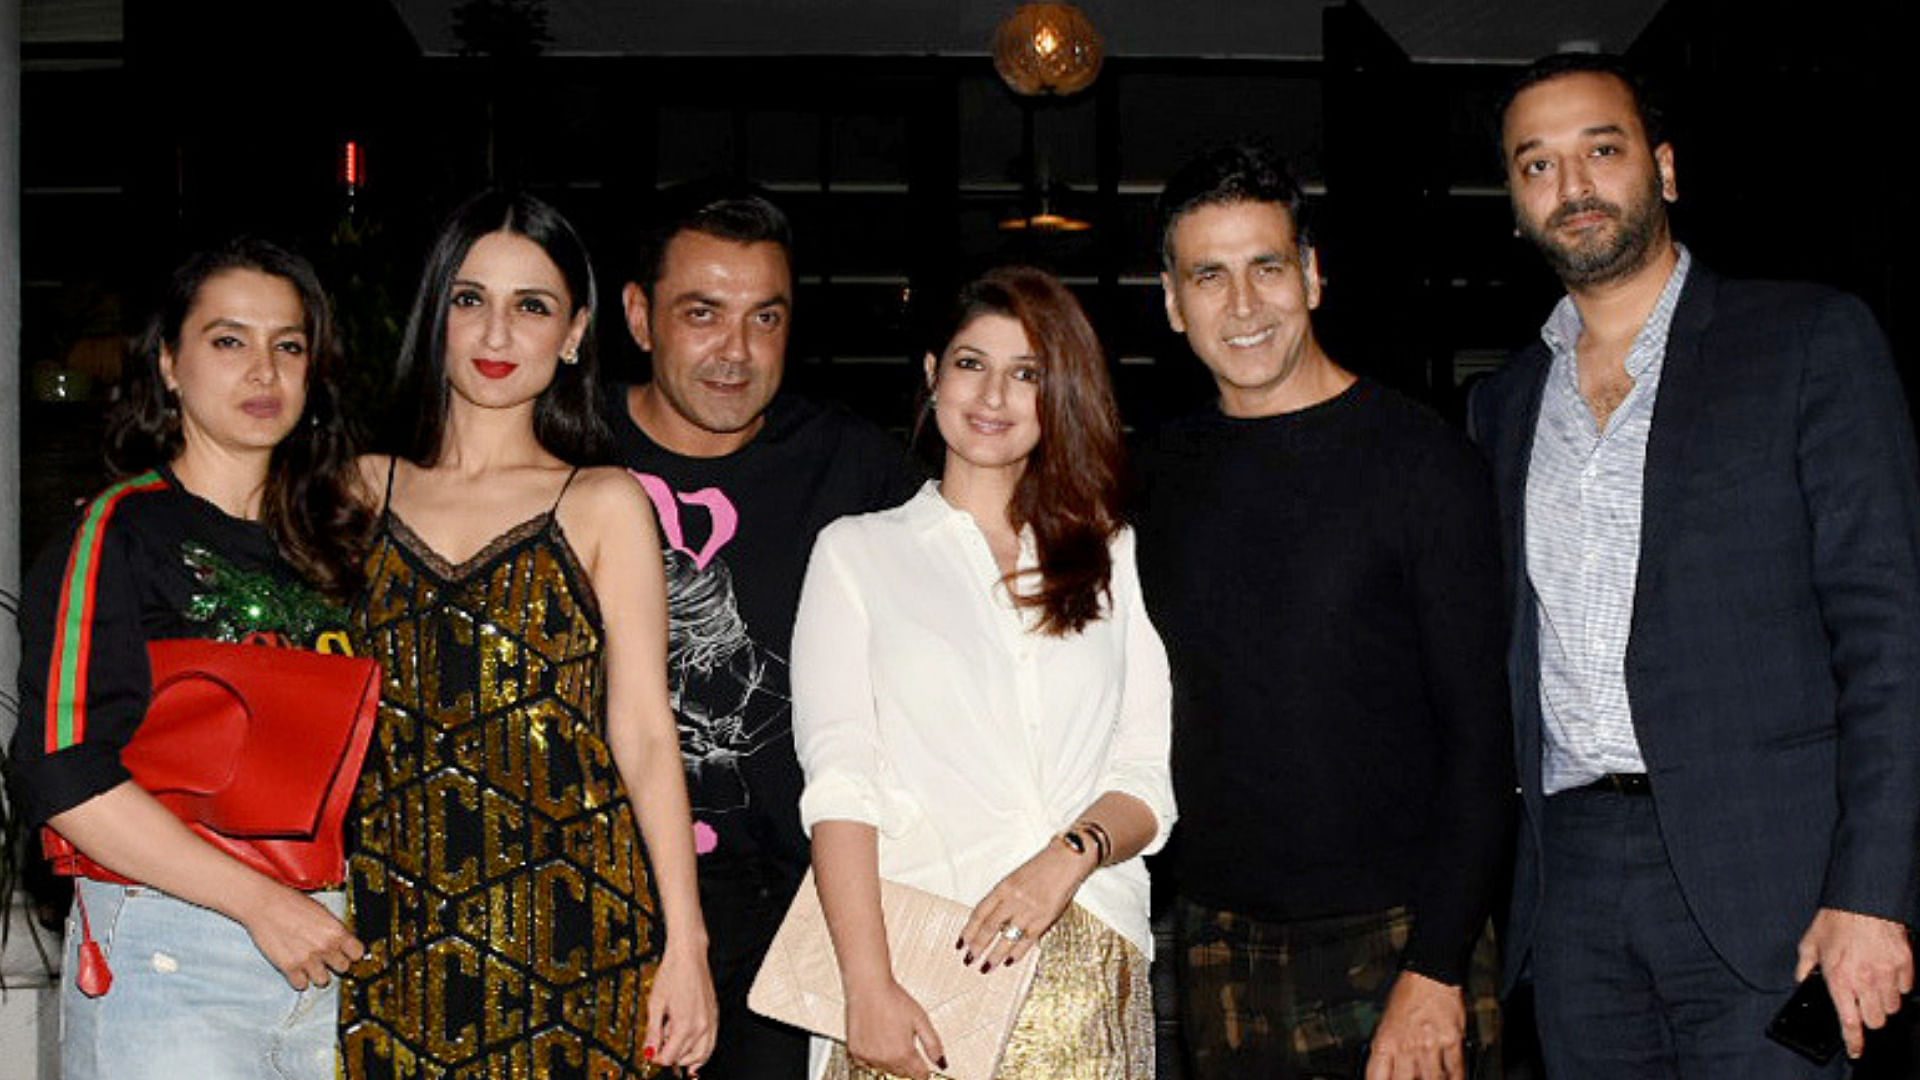 Twinkle Khanna and Akshay Kumar celebrate their wedding anniversary with friends.